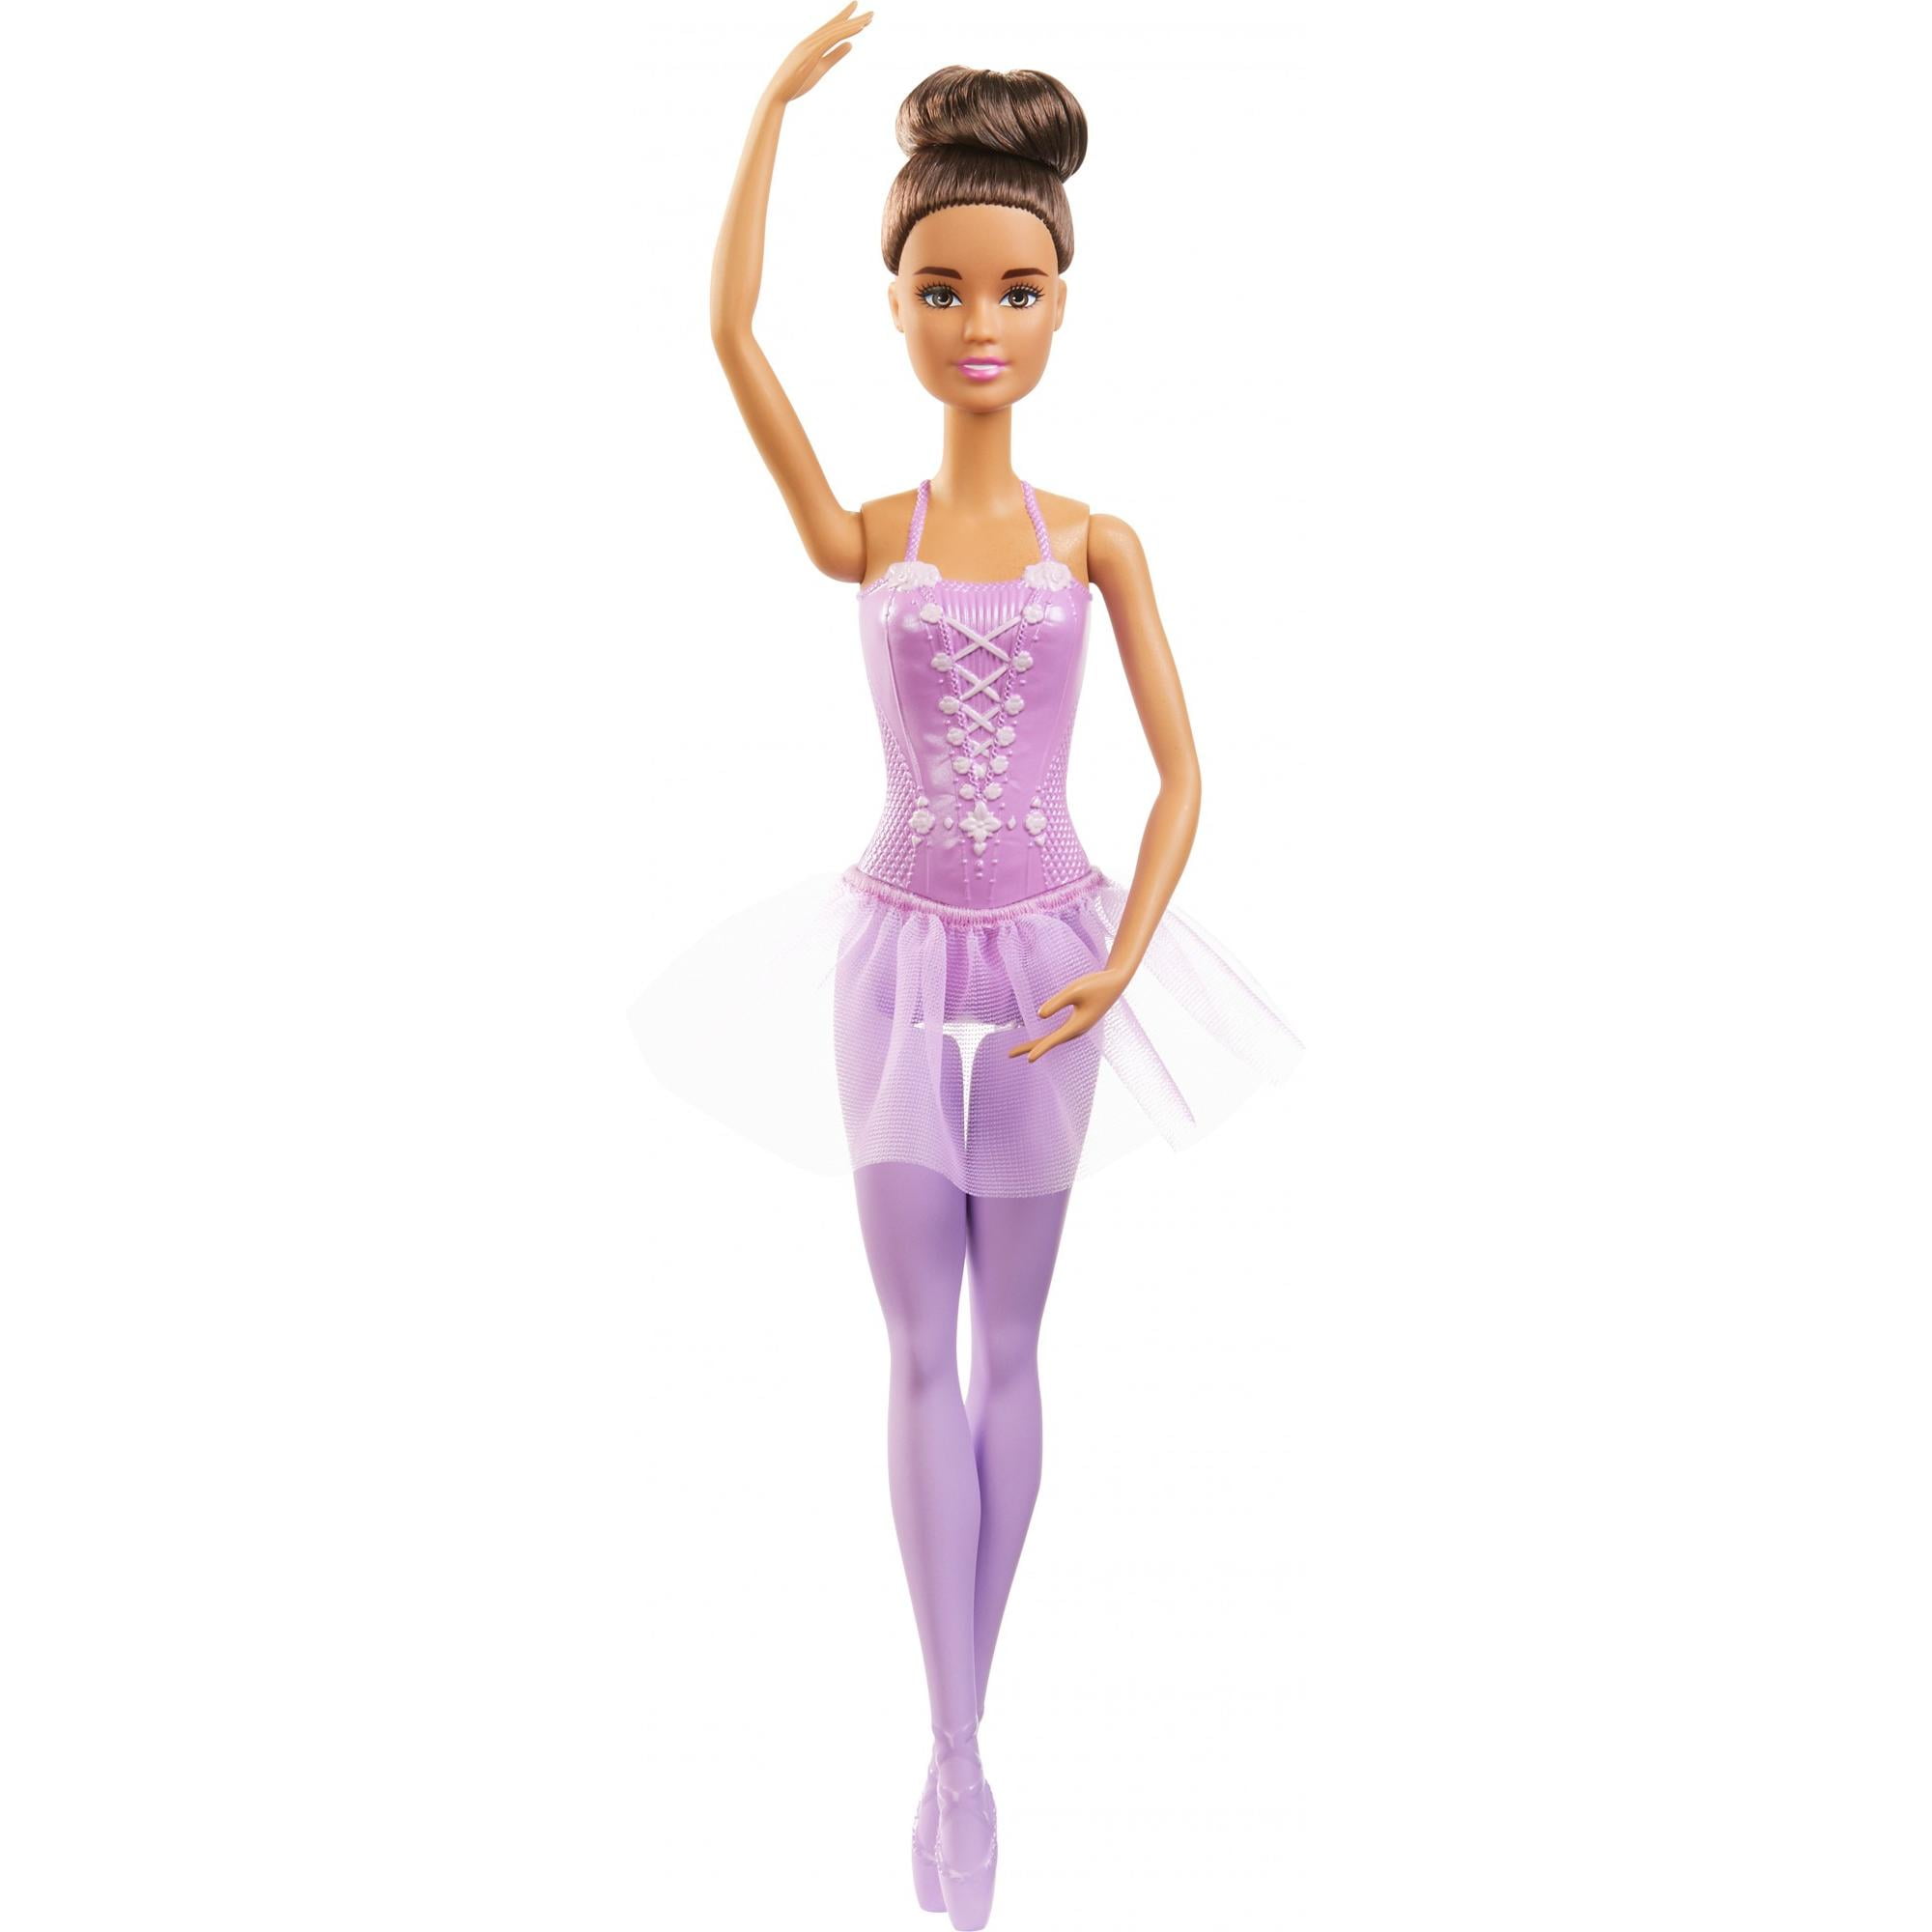 Barbie Career Ballerina Doll with Tutu and Sculpted Toe Shoes, Brunette Hair